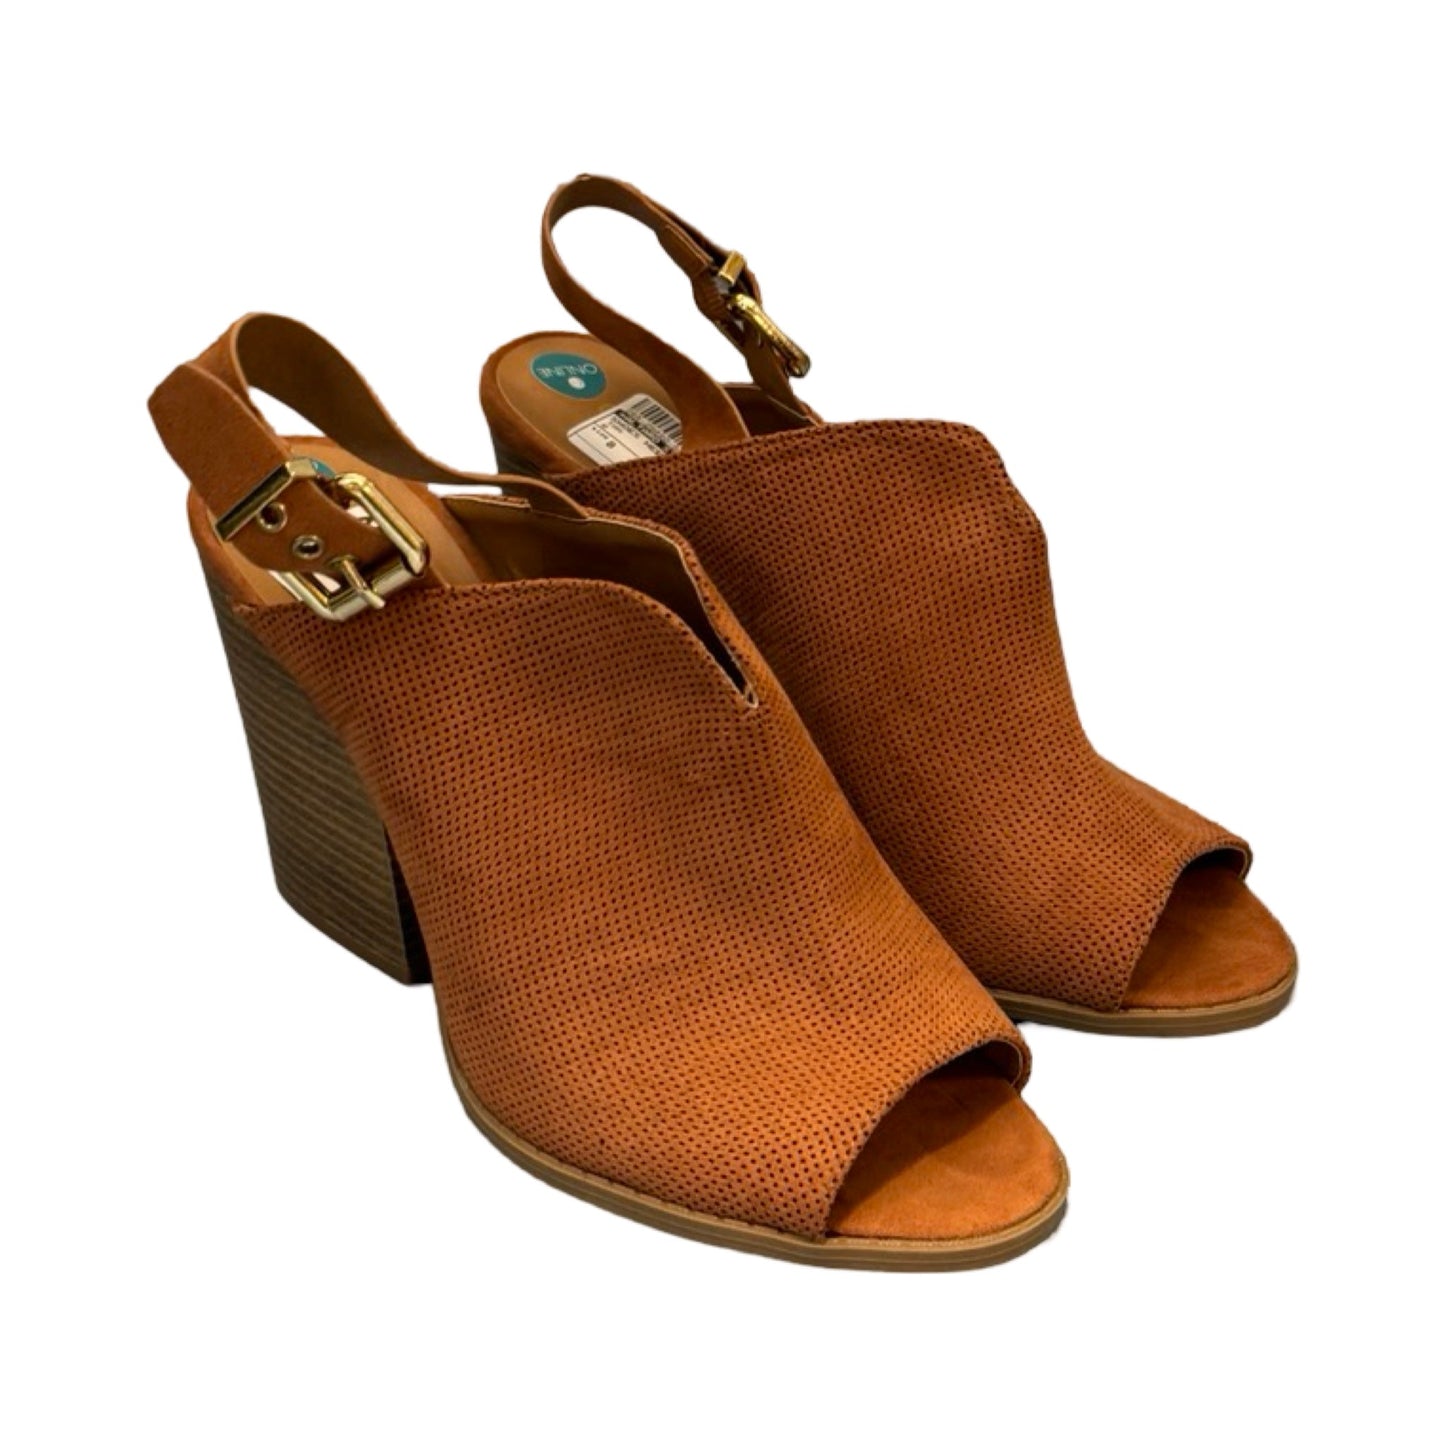 Tan Shoes Heels Block Altard State, Size 8